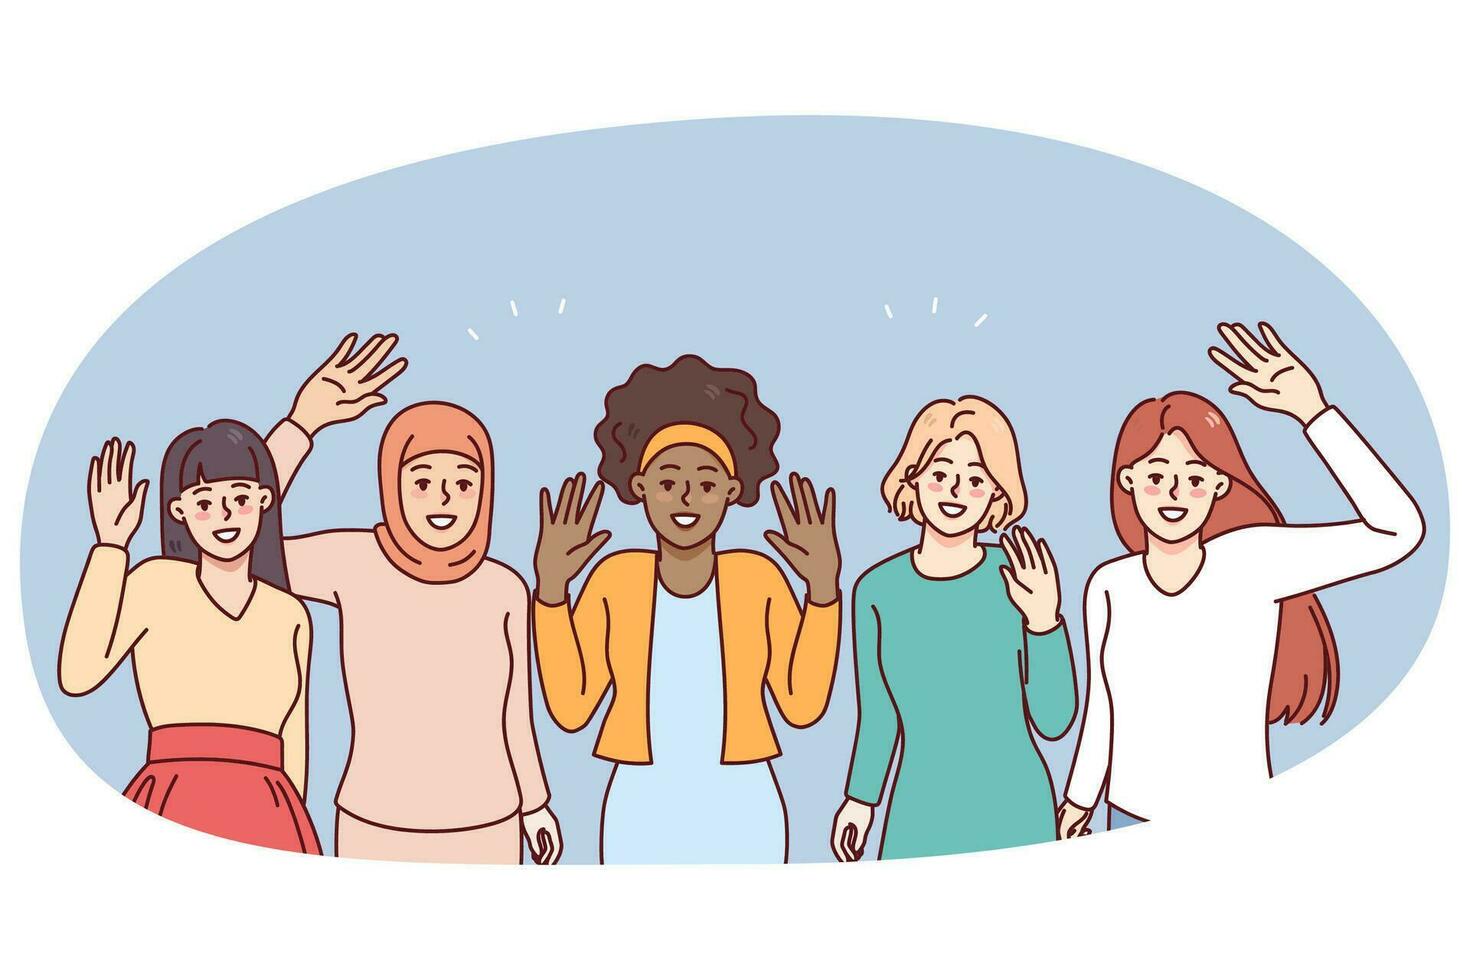 Happy diverse women waving hands showing international friendship and unity. Smiling multiethnic girlfriends group. Diversity concept. Vector illustration.